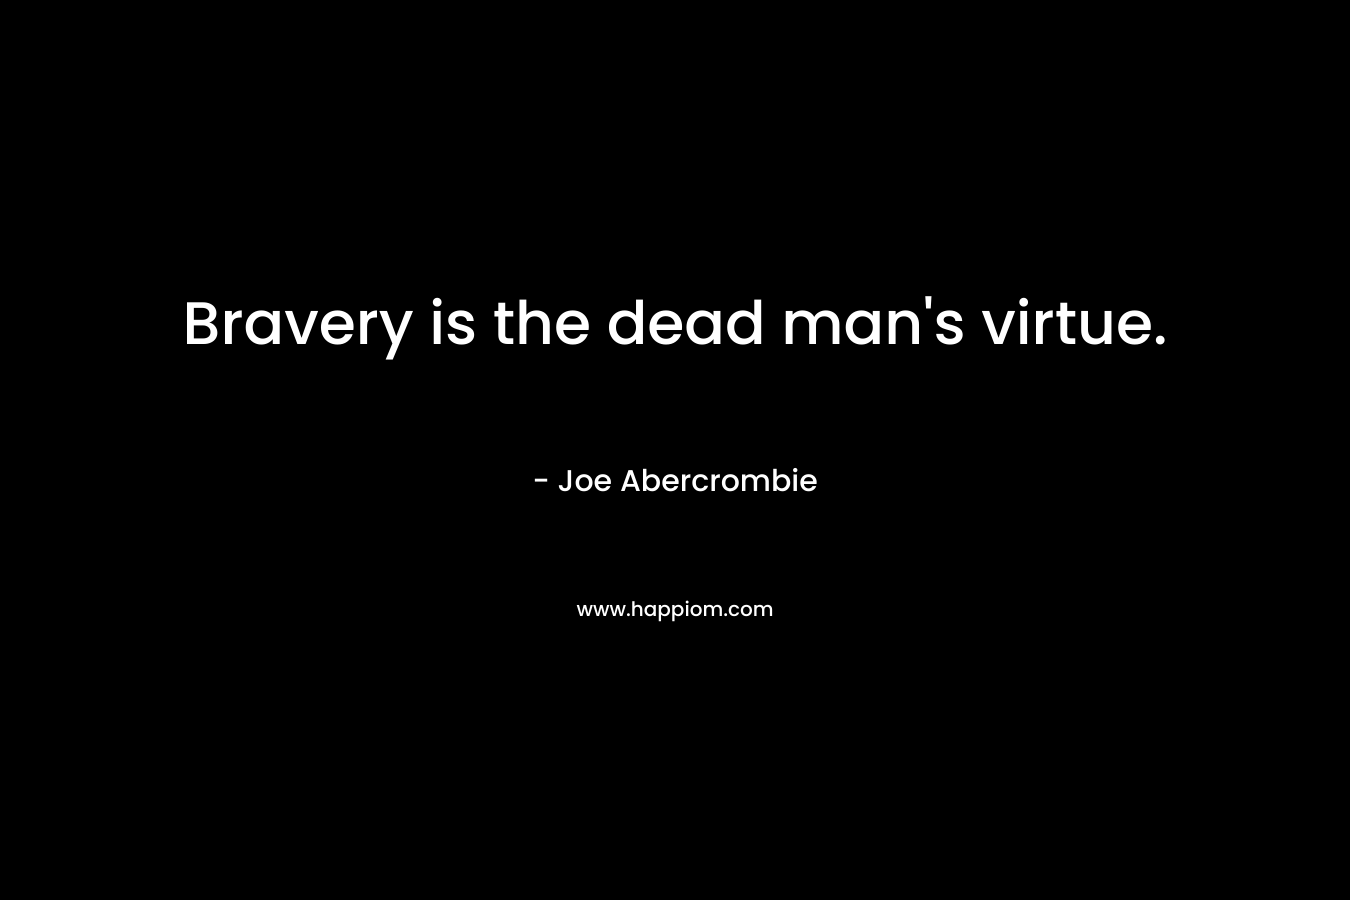 Bravery is the dead man's virtue.